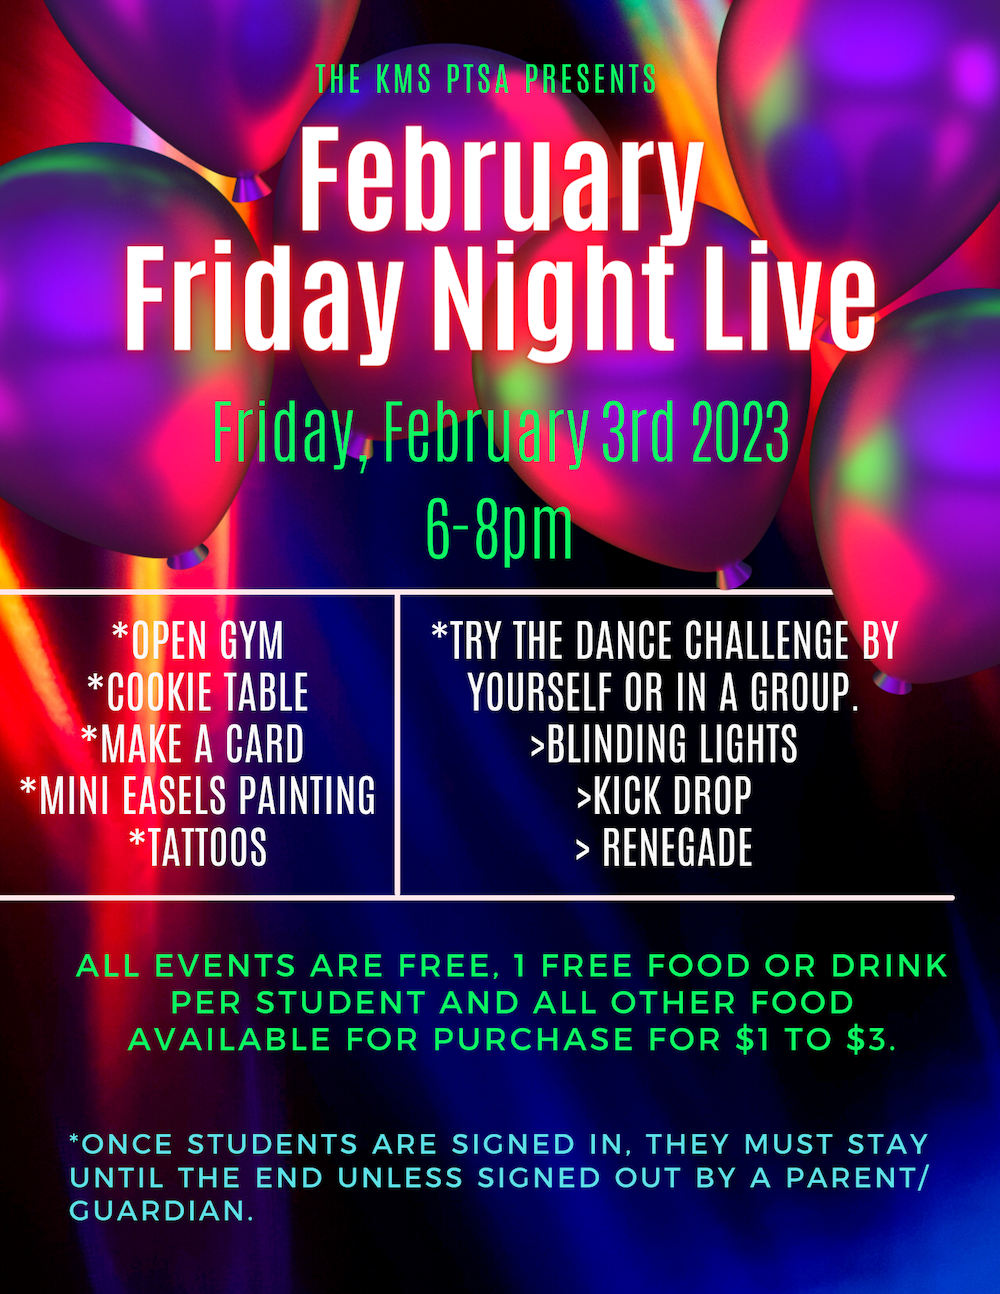 Friday Night Live poster. February 3, 2023 from 6-8pm at the Kodiak Middle School.